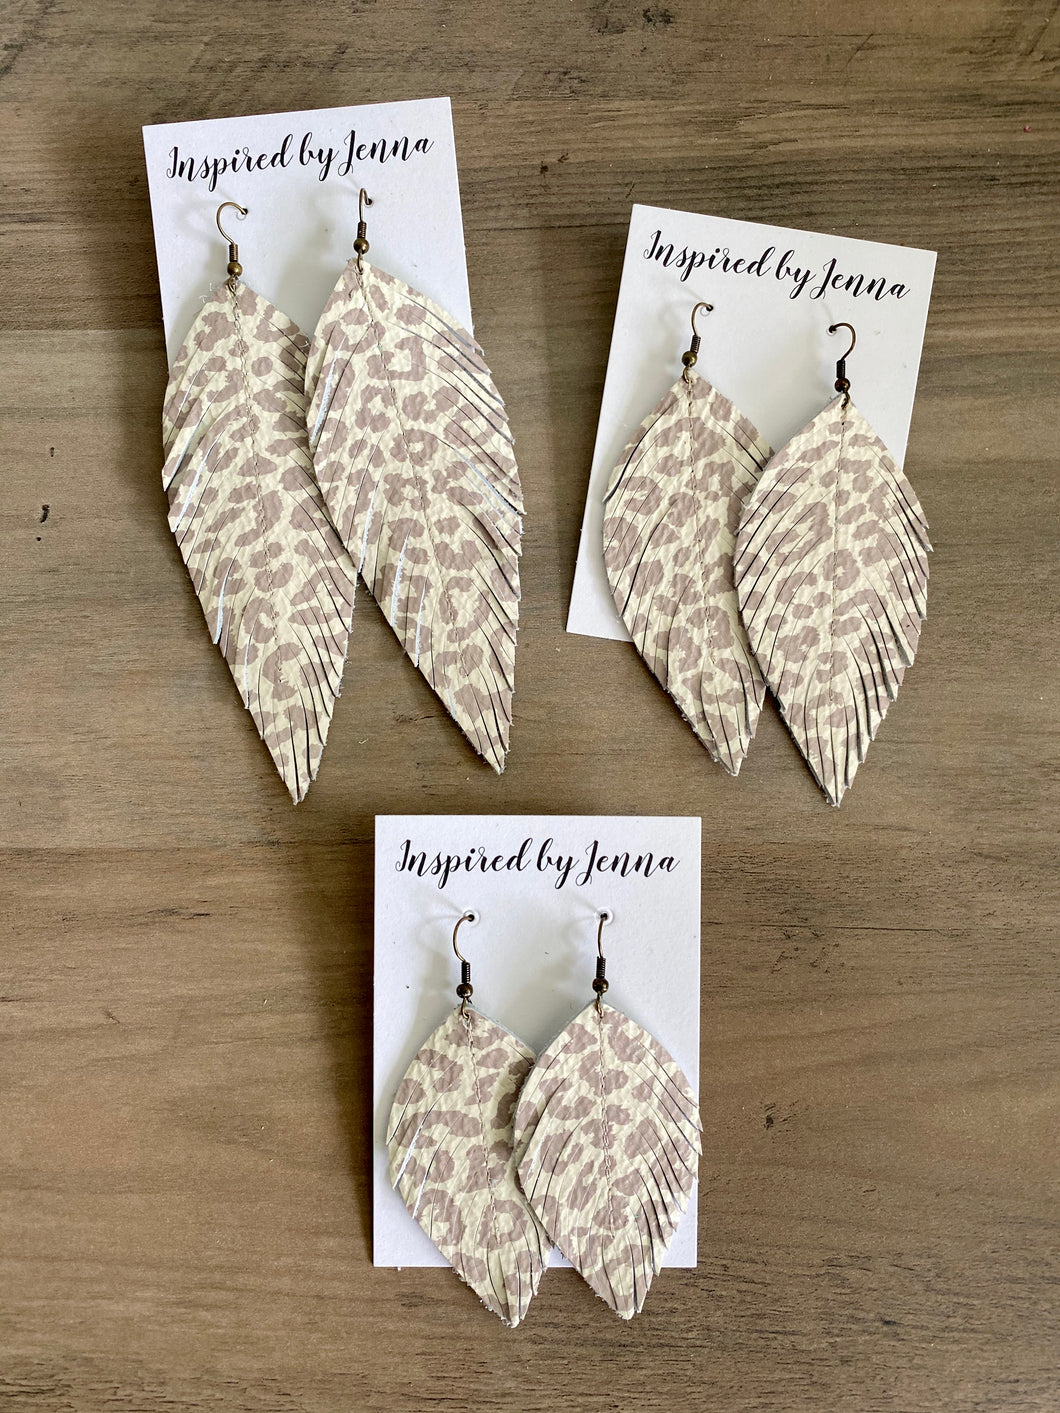 Snow Leopard Leather Feather Earrings (4 sizes)